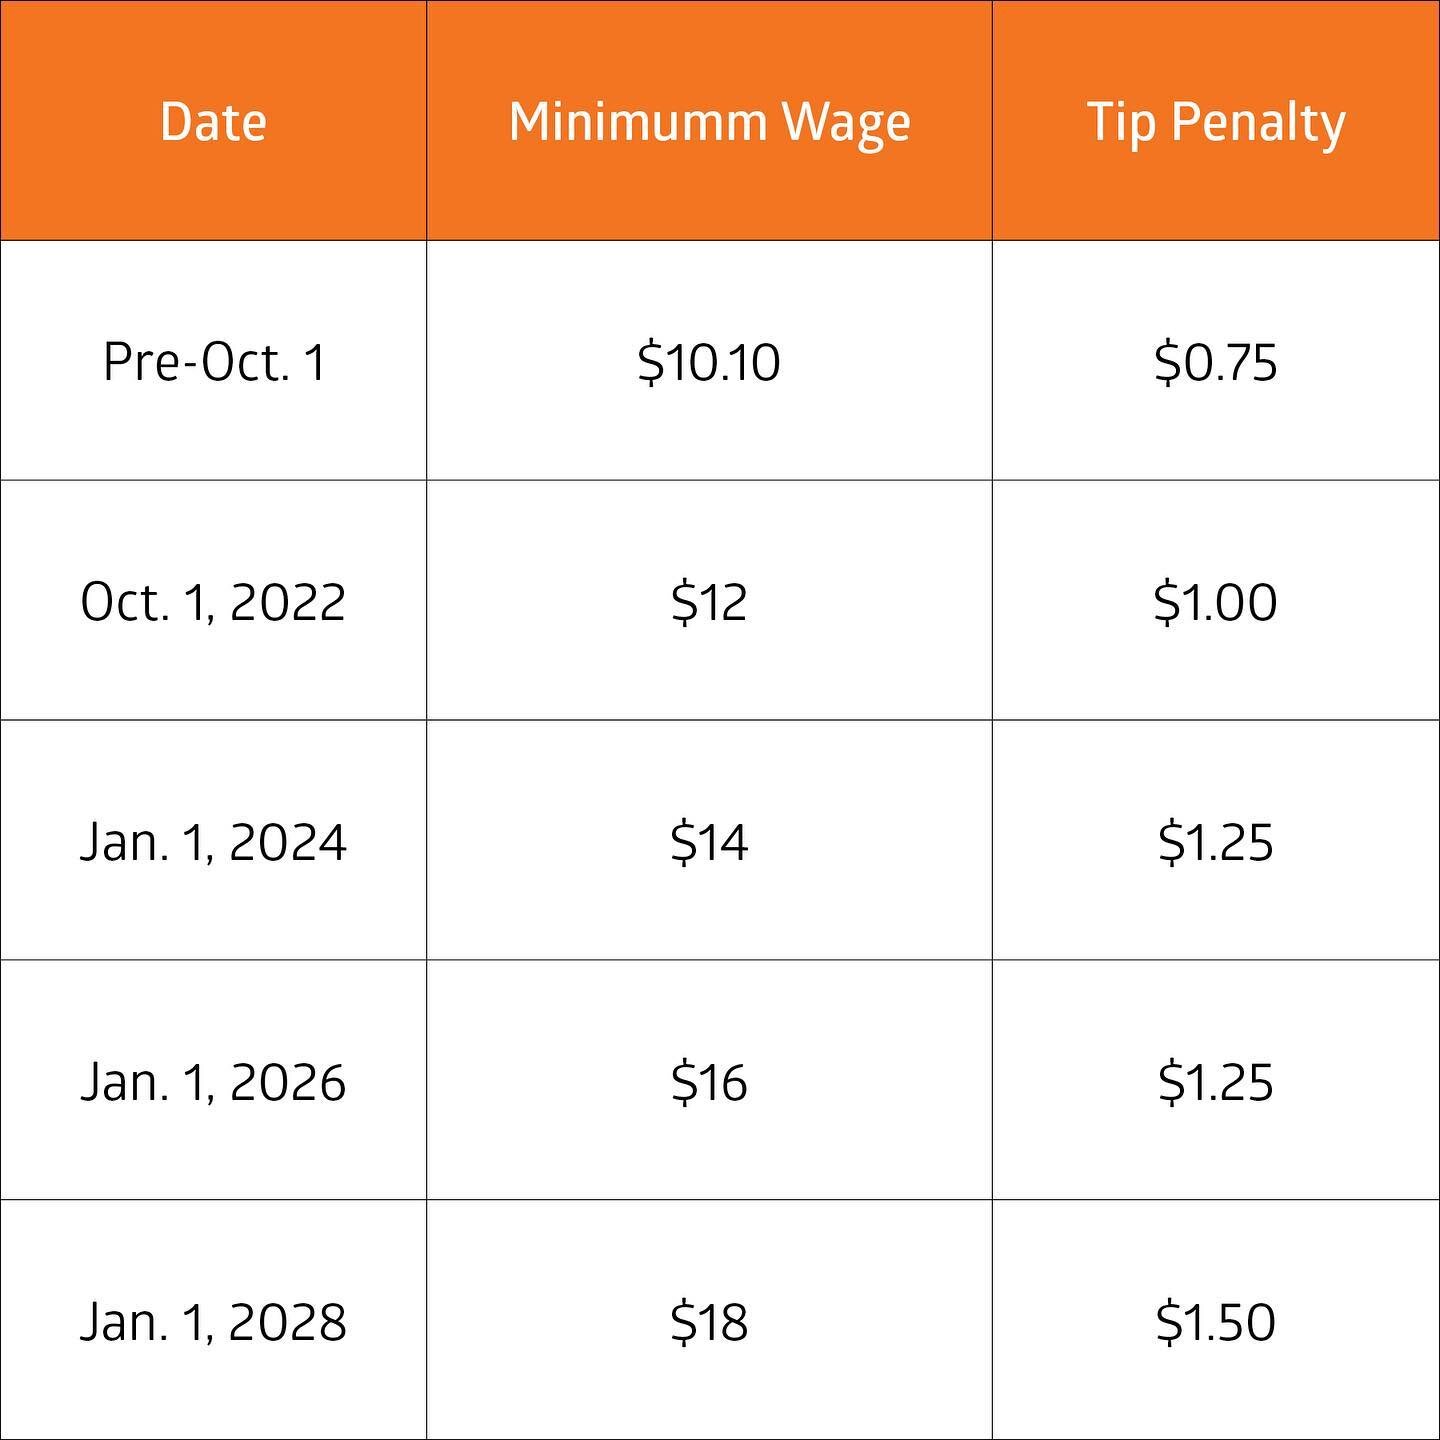 In just three weeks, #Hawaii's #MinimumWage is increasing to $12 an hour, while the state's tip penalty will increase to $1 an hour. 

What exactly does that mean? How can you tell if your employer is properly applying the tip penalty? 
 
We&rsquo;ve